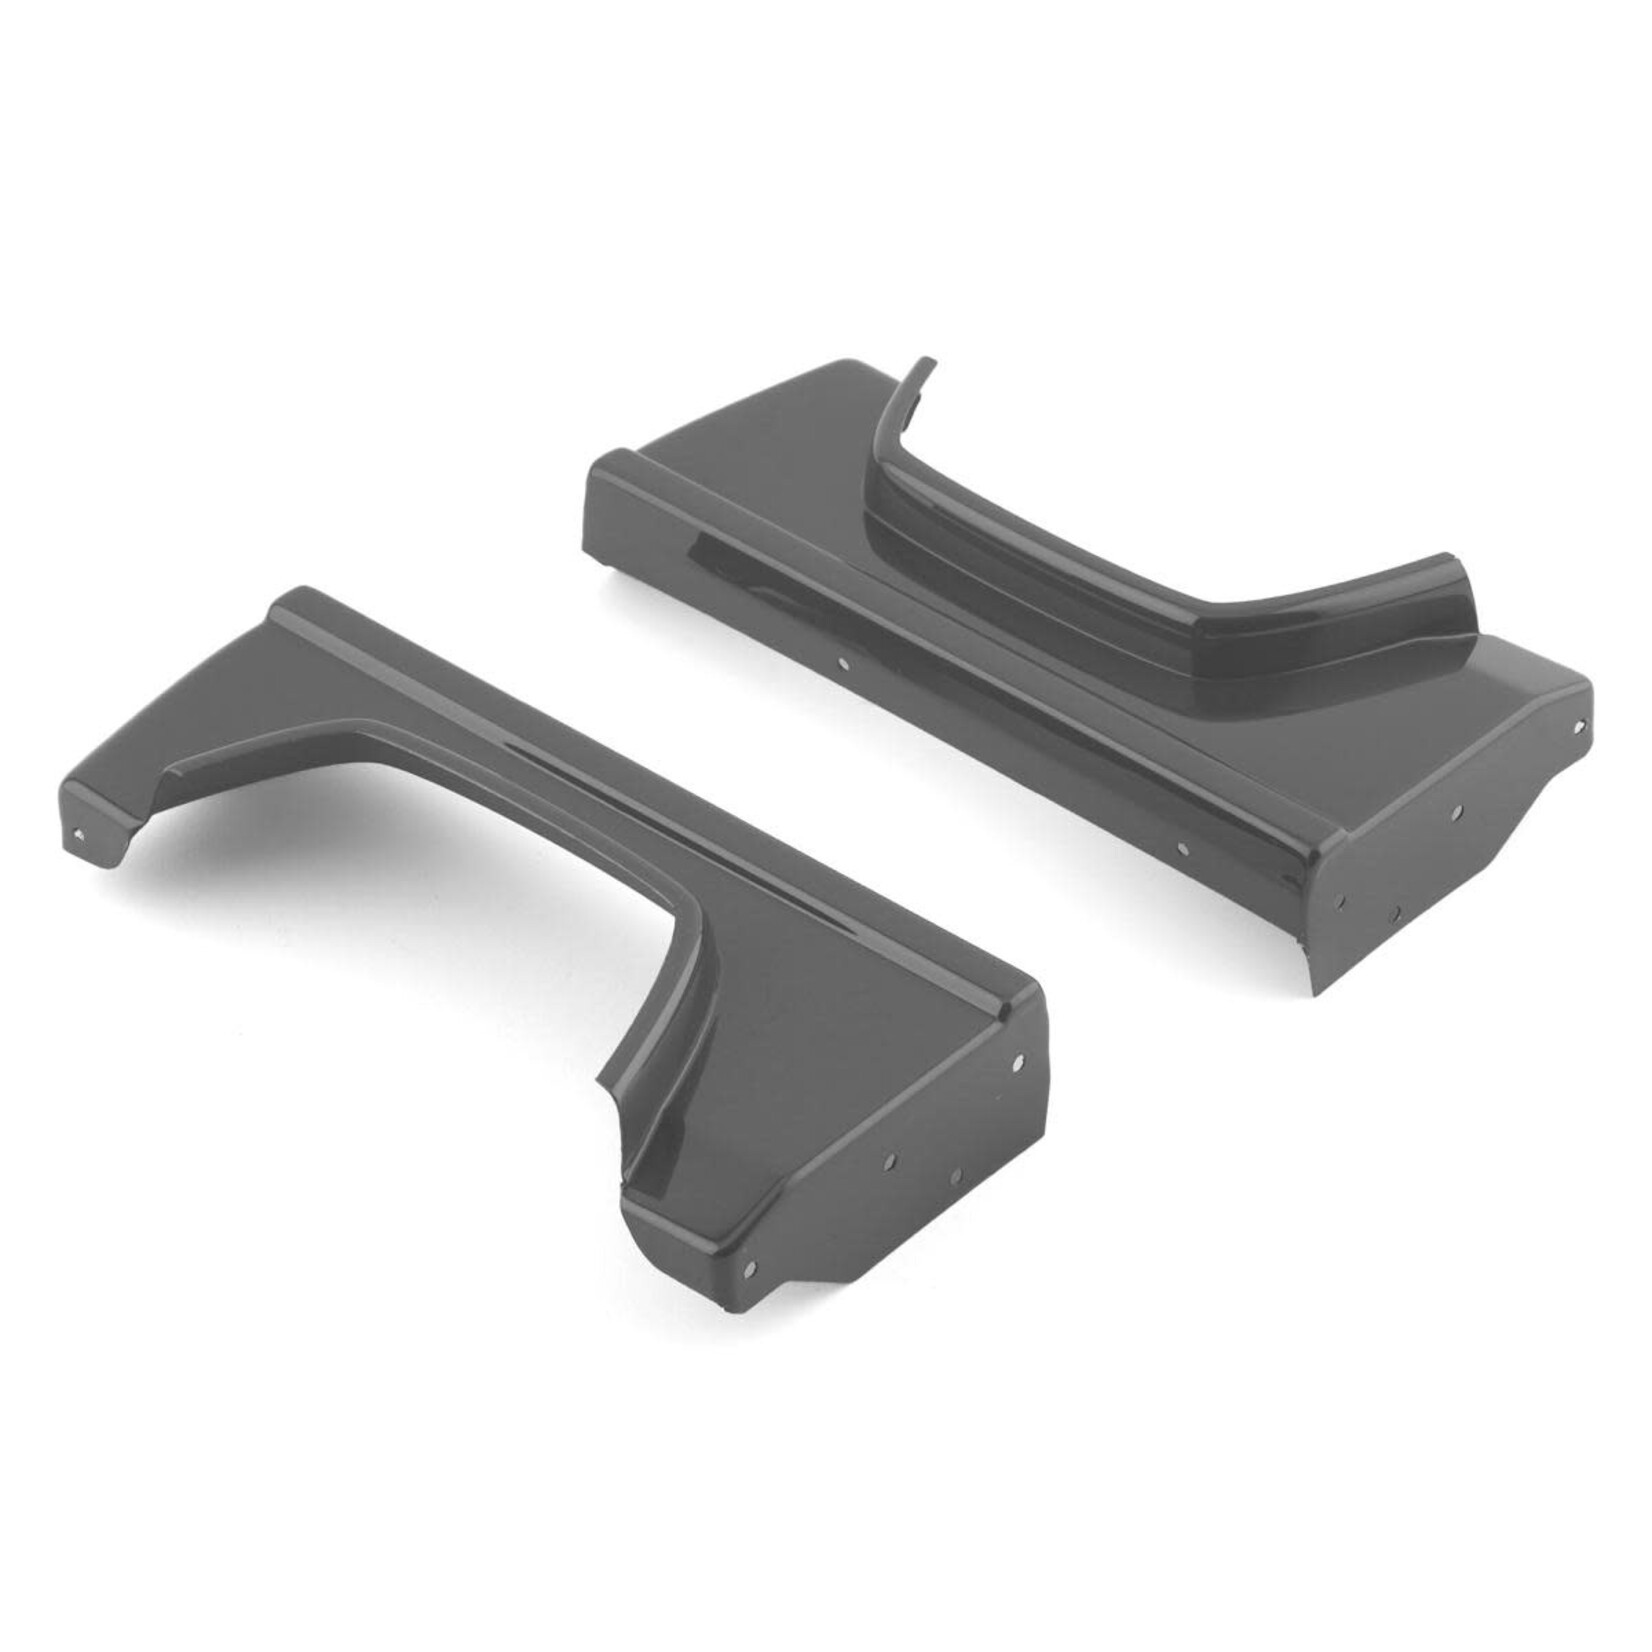 Vanquish Products Vanquish Products VS4-10 Phoenix Pre-Painted Bedsides (Grey) (2) #VPS10223